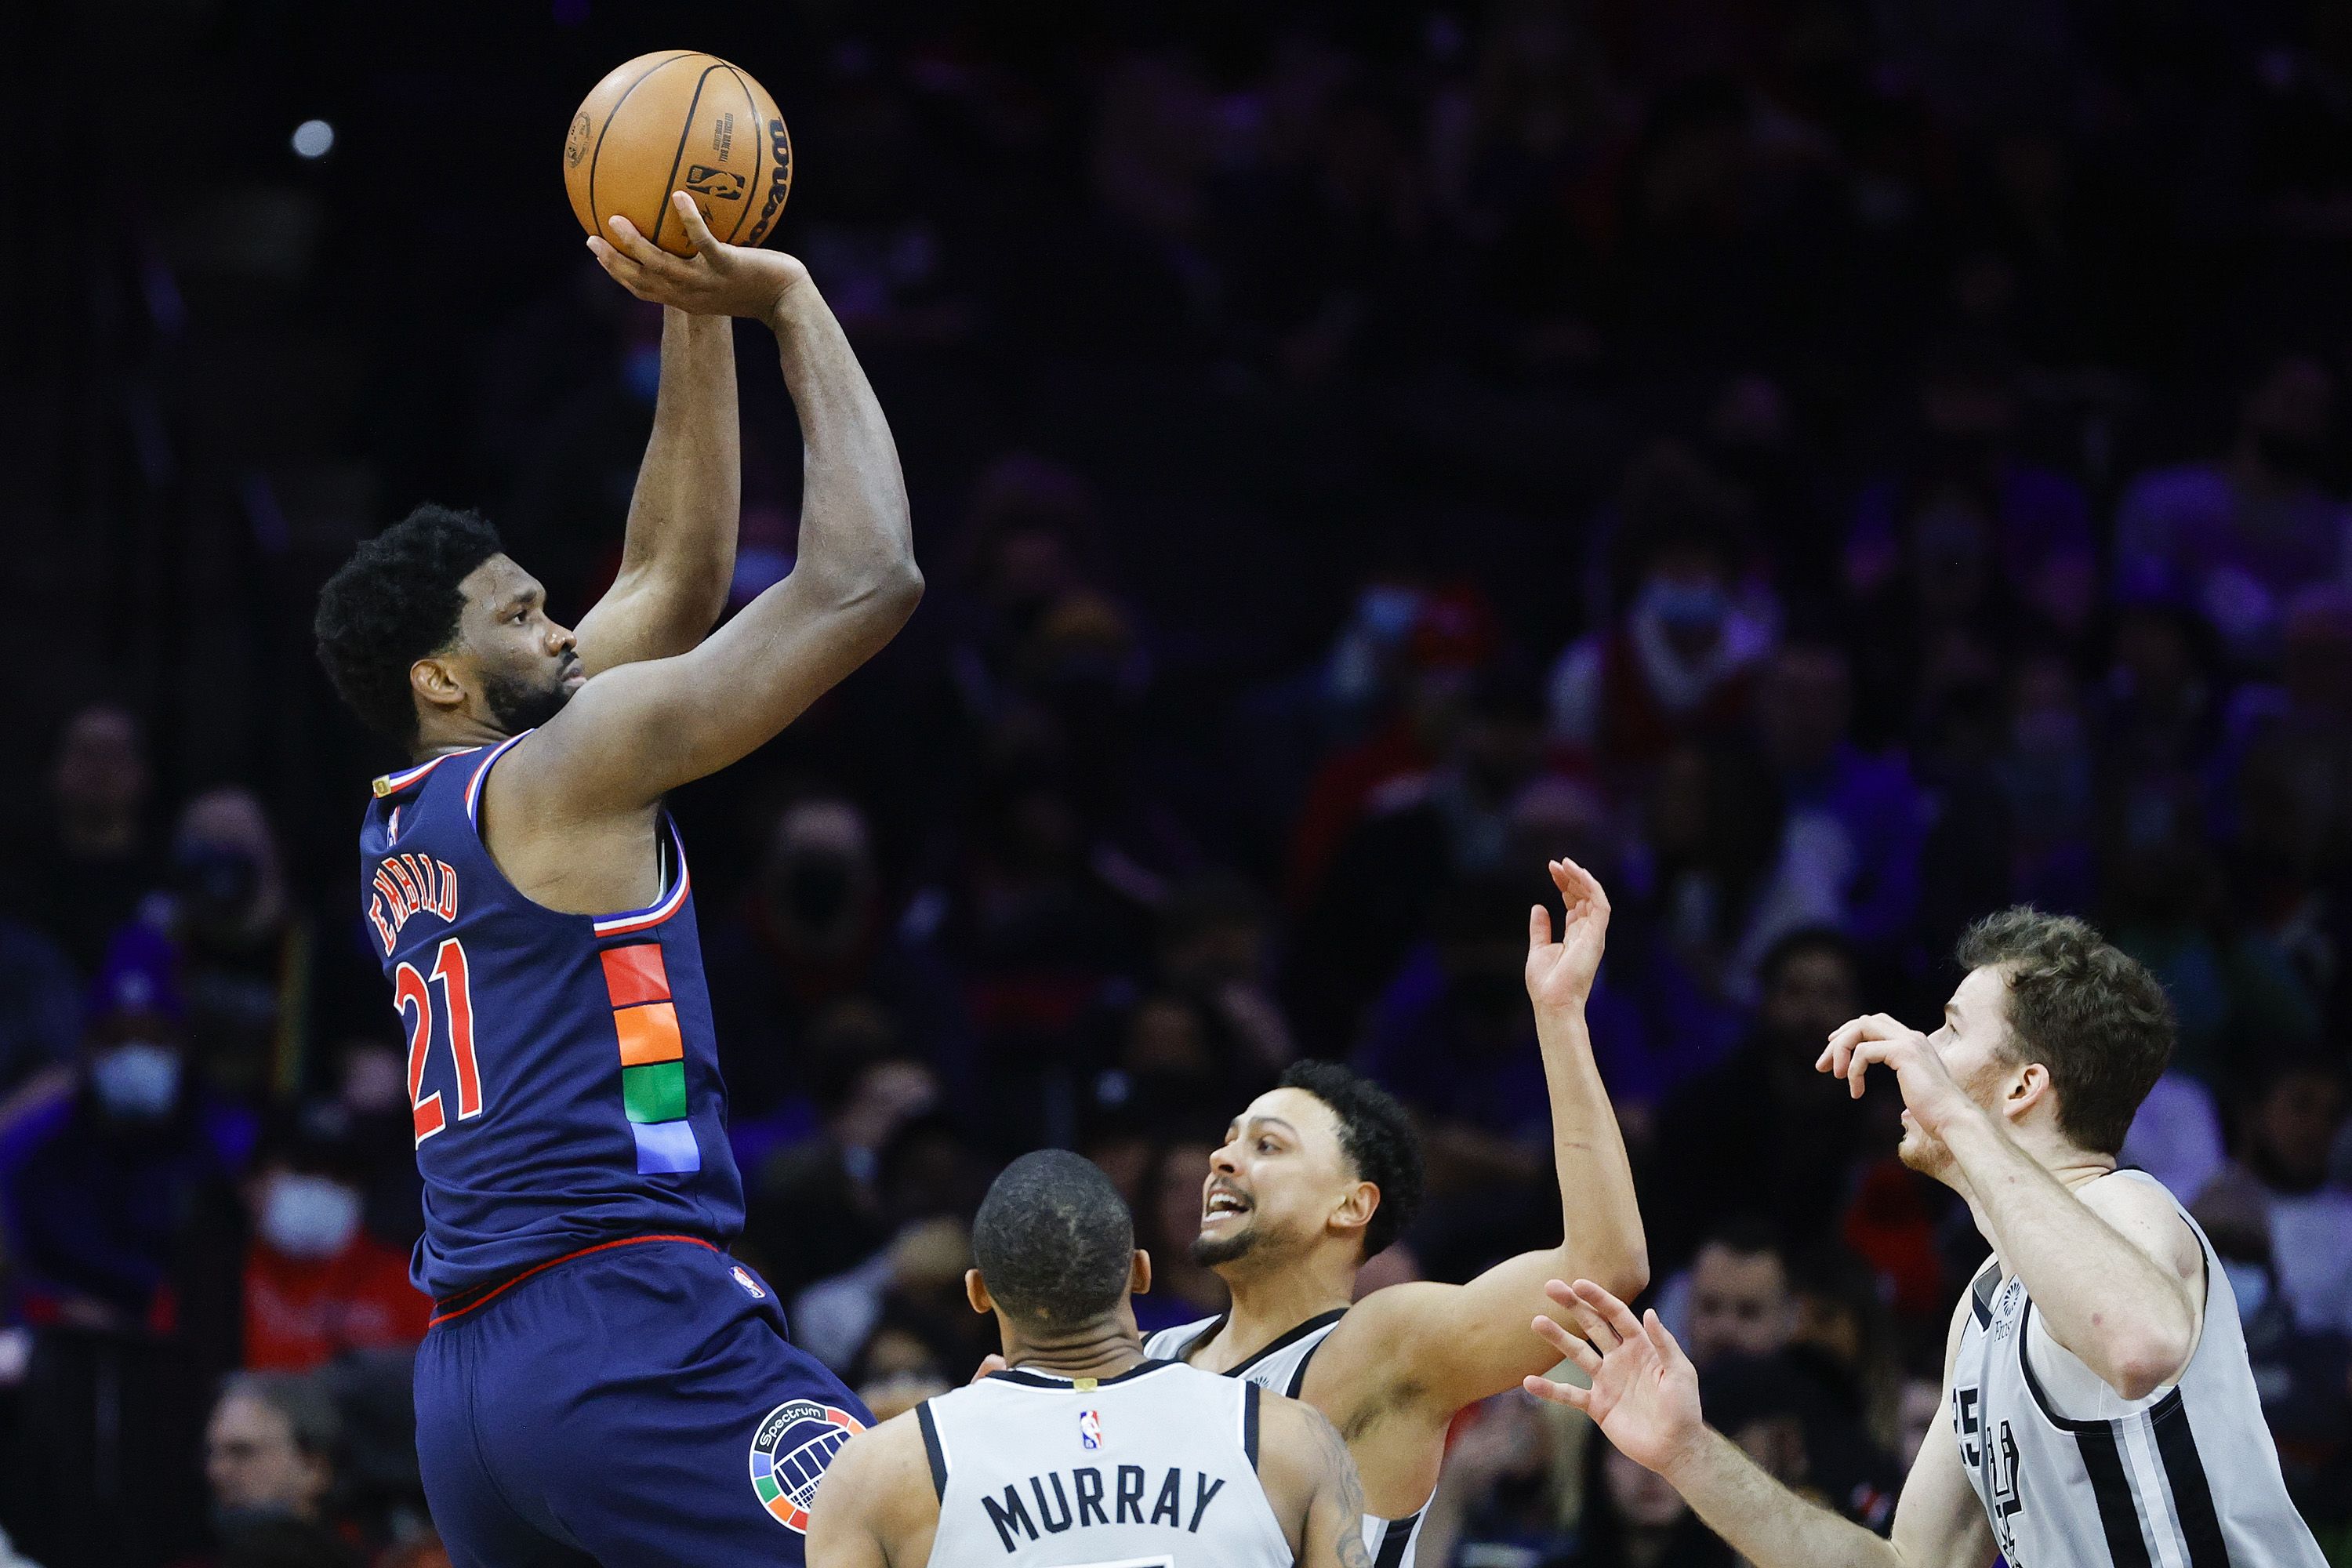 NBA fans rejoice about Embiid's increased minutes